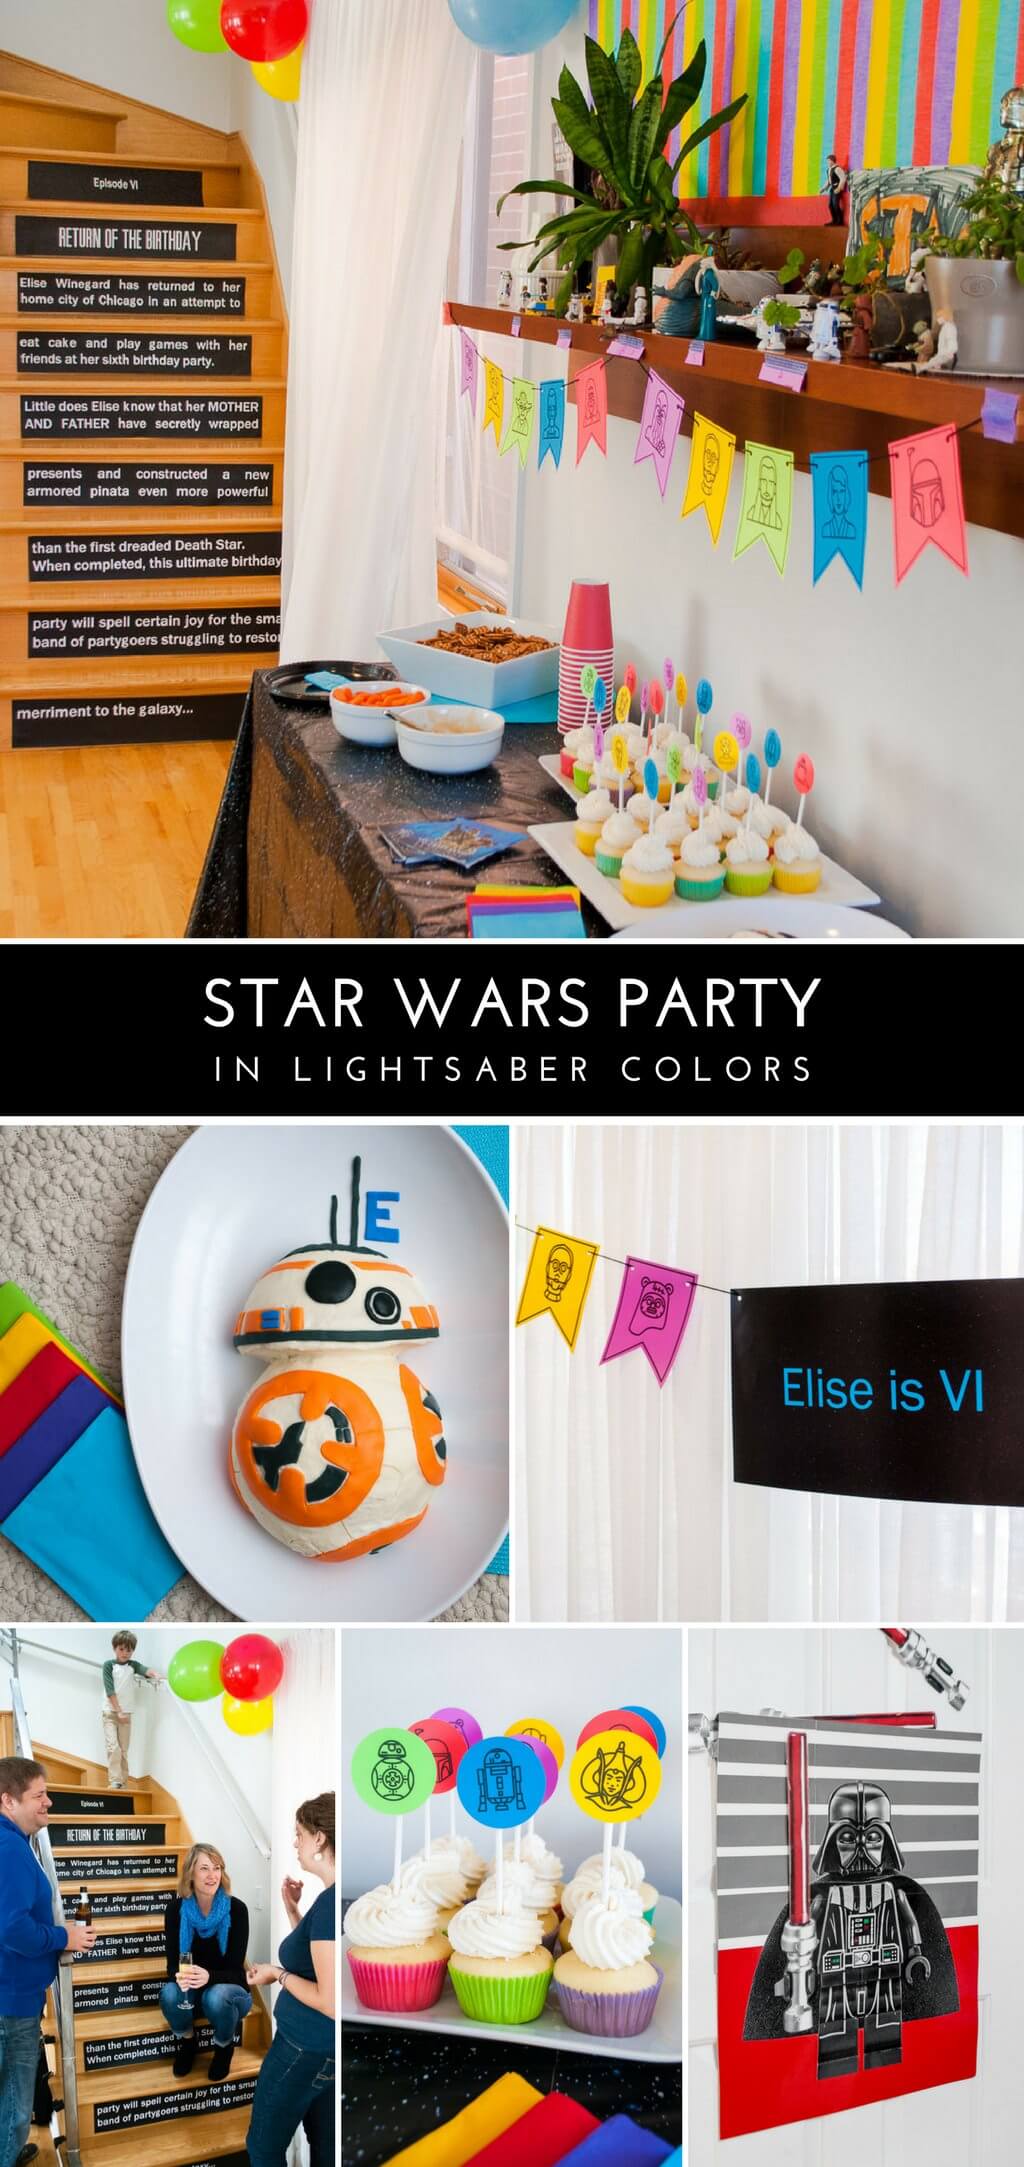 Star Wars Birthday Party Decorations in Lightsaber Colors! Printables,  games, ideas & treats - Merriment Design